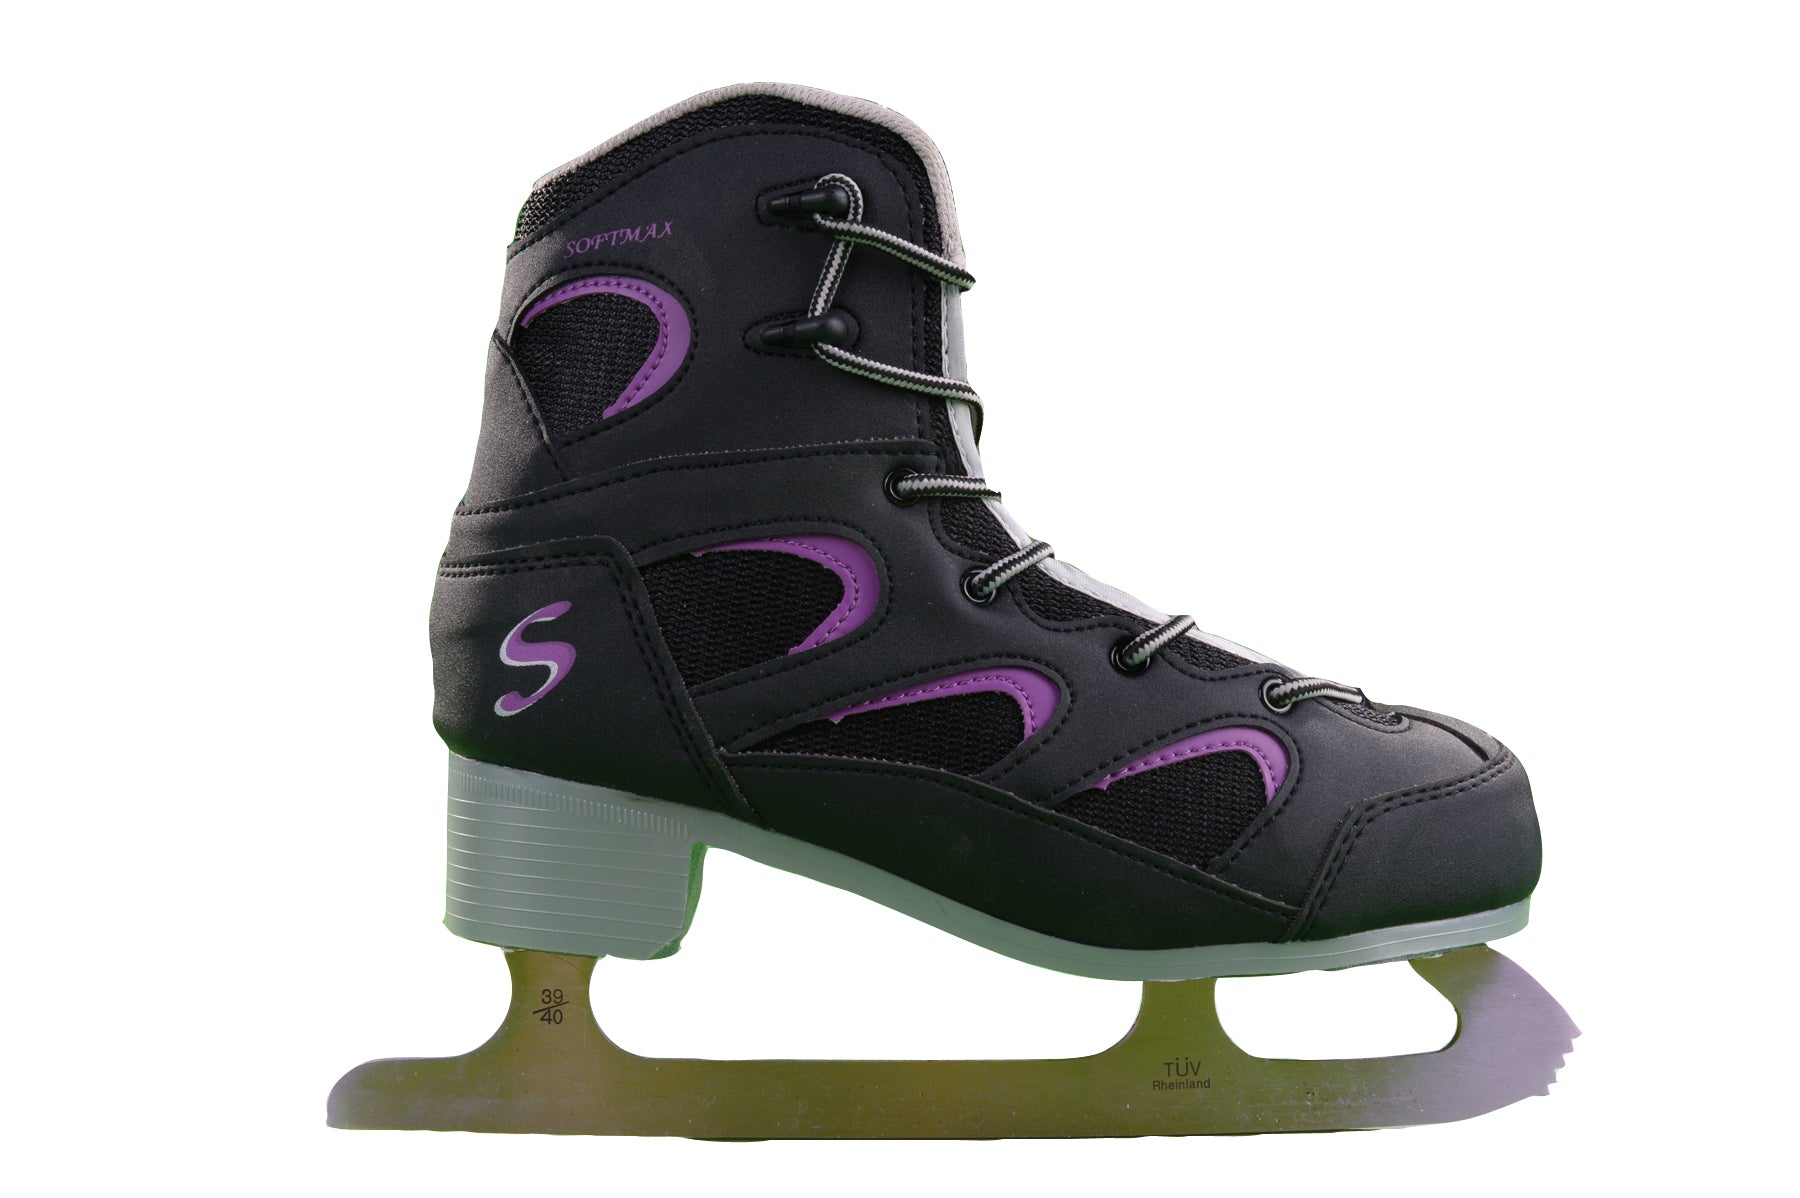 PATIN SOFTMAX CATALINA FILLE